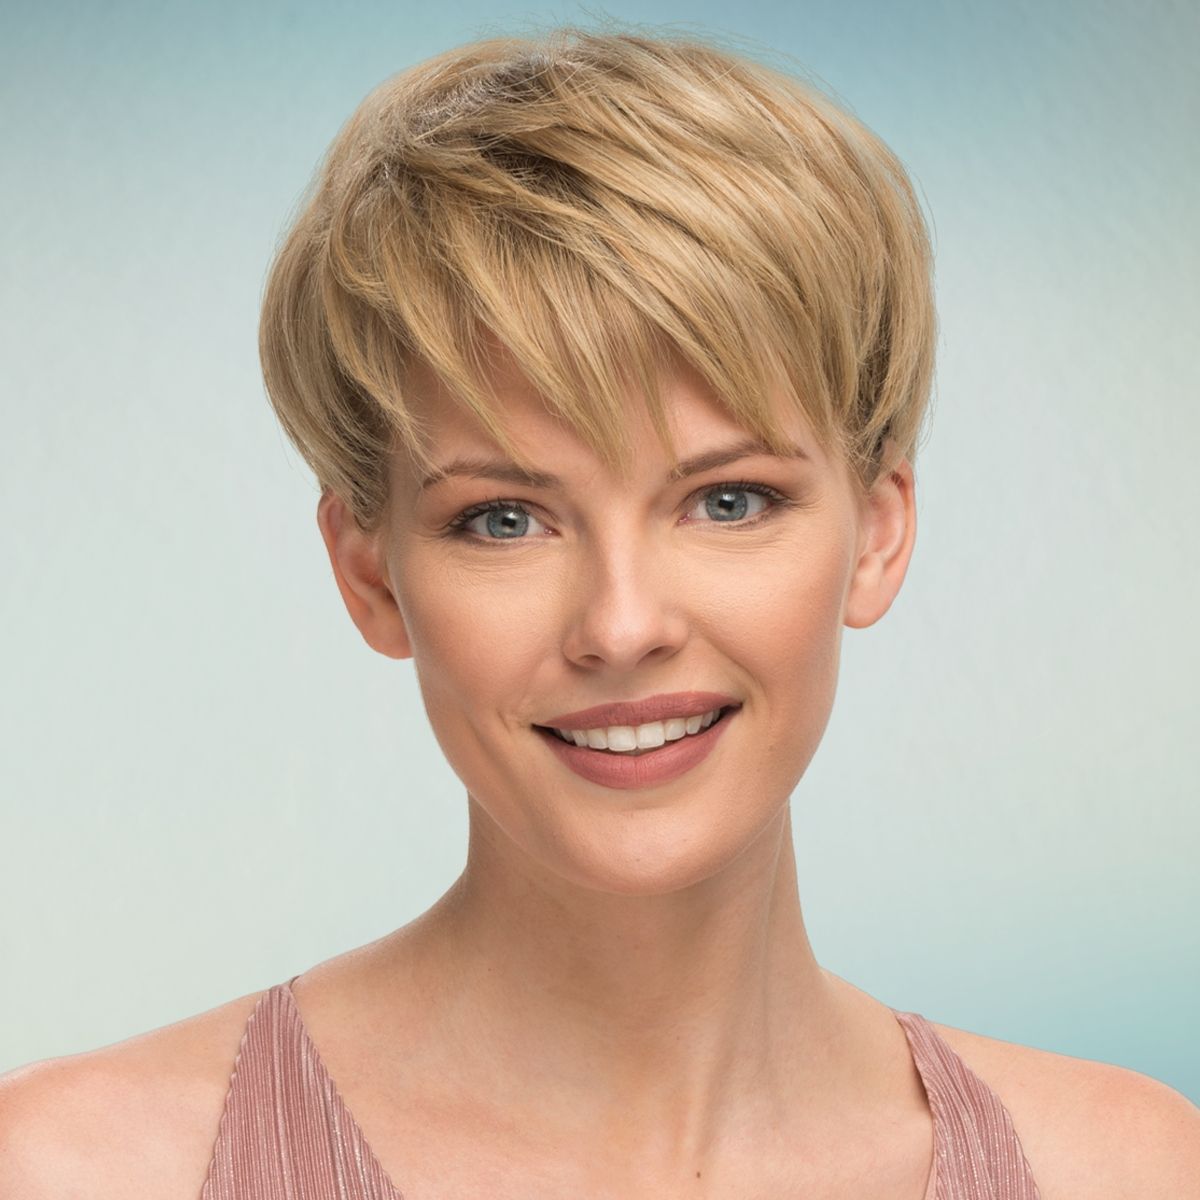 The Classic Pixie Haircut Is A Contemporary Hairstyle That's Short Throughout Most Up To Date Contemporary Pixie Haircuts (View 9 of 15)